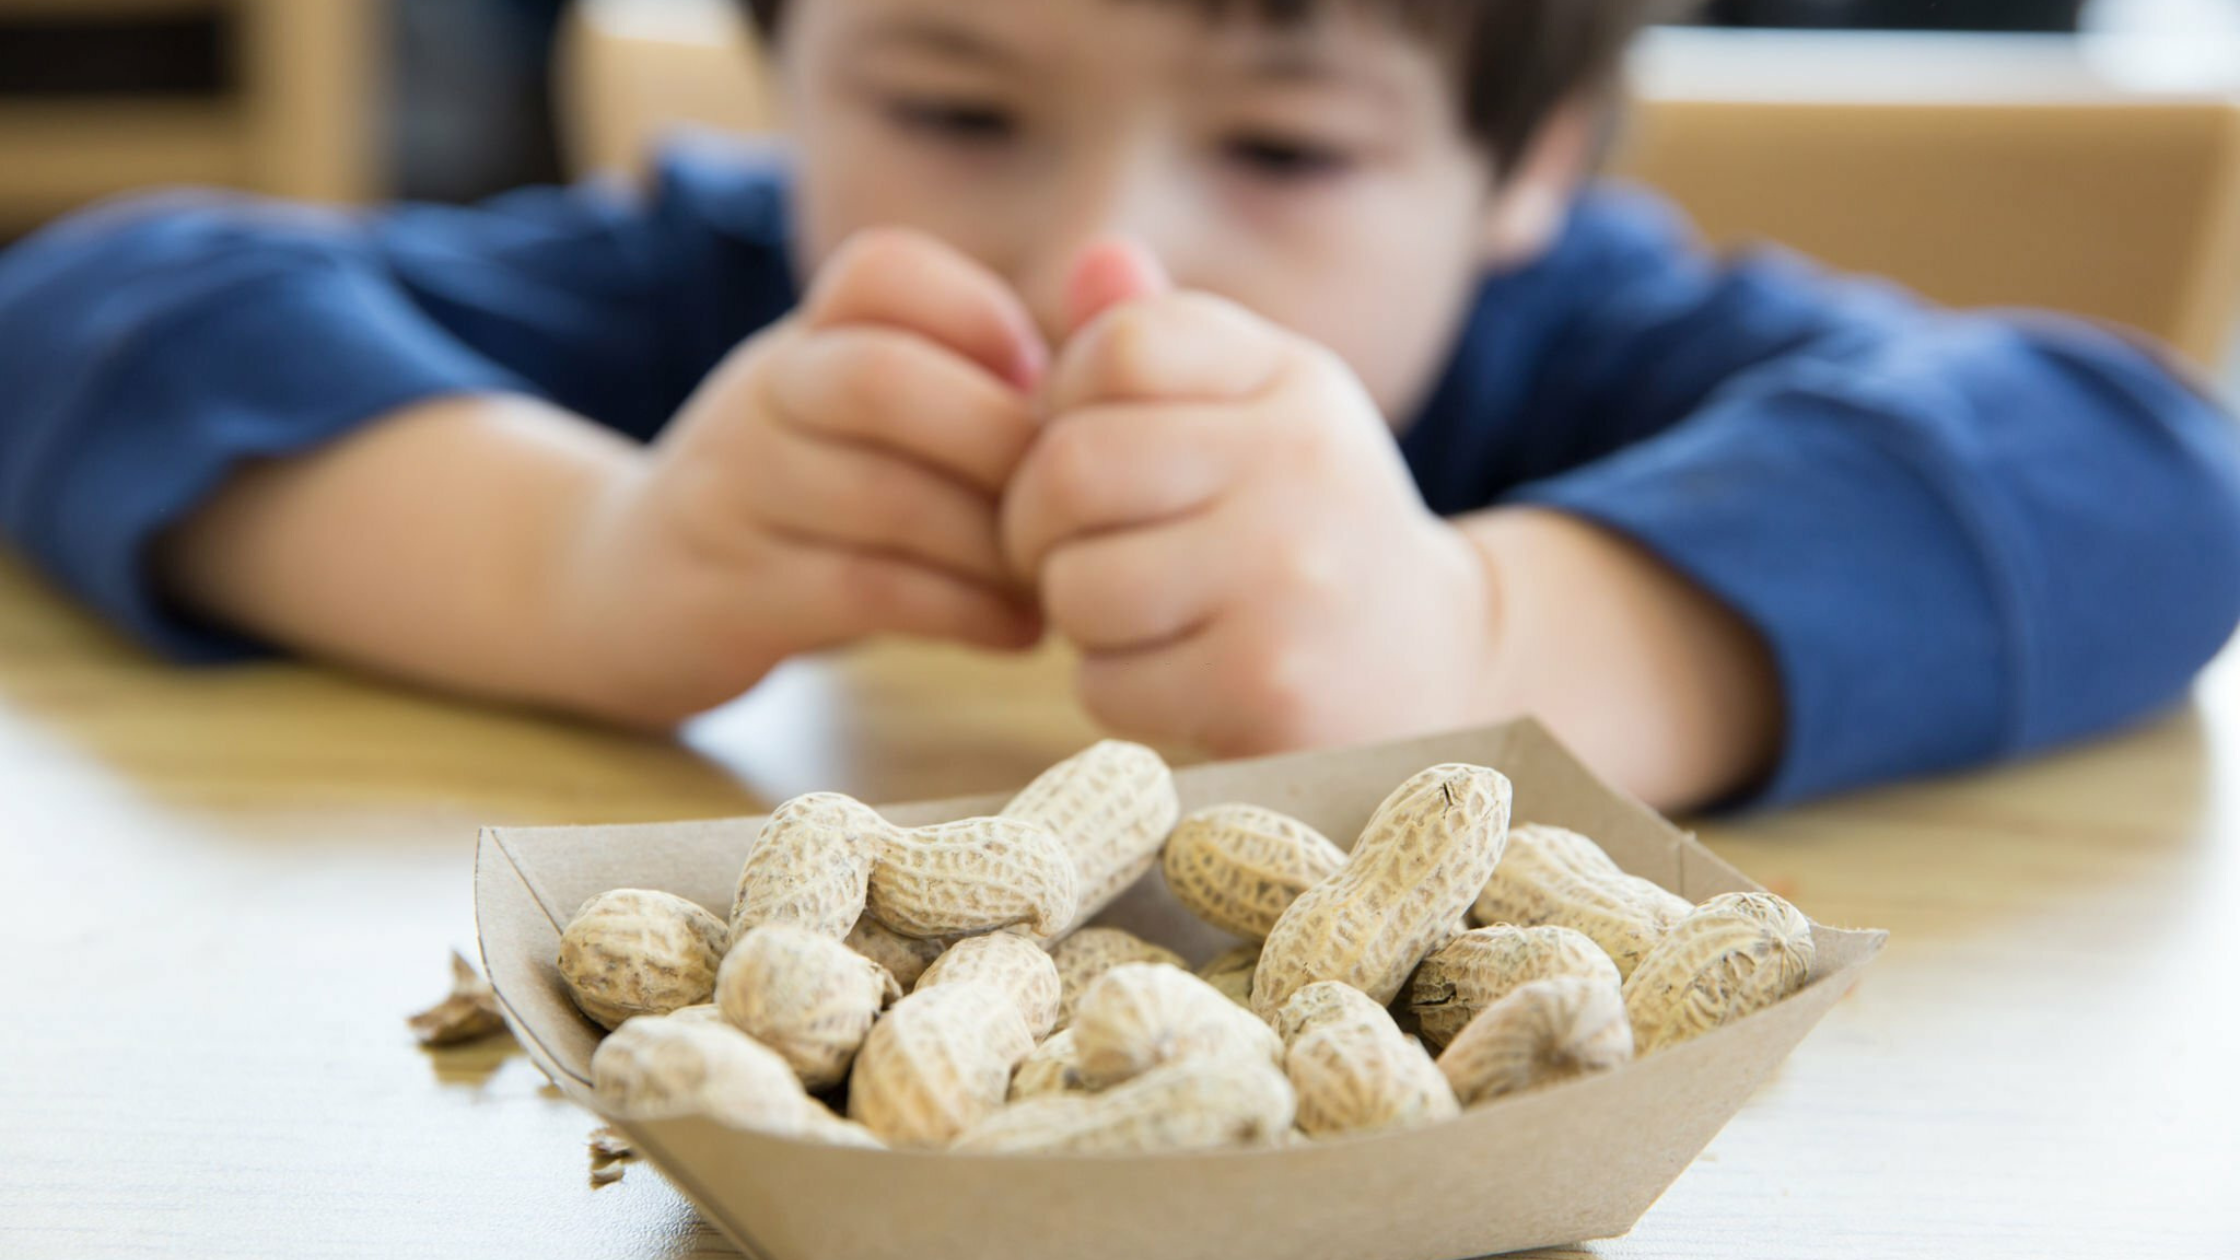 Food Allergies and their Connection to Eczema